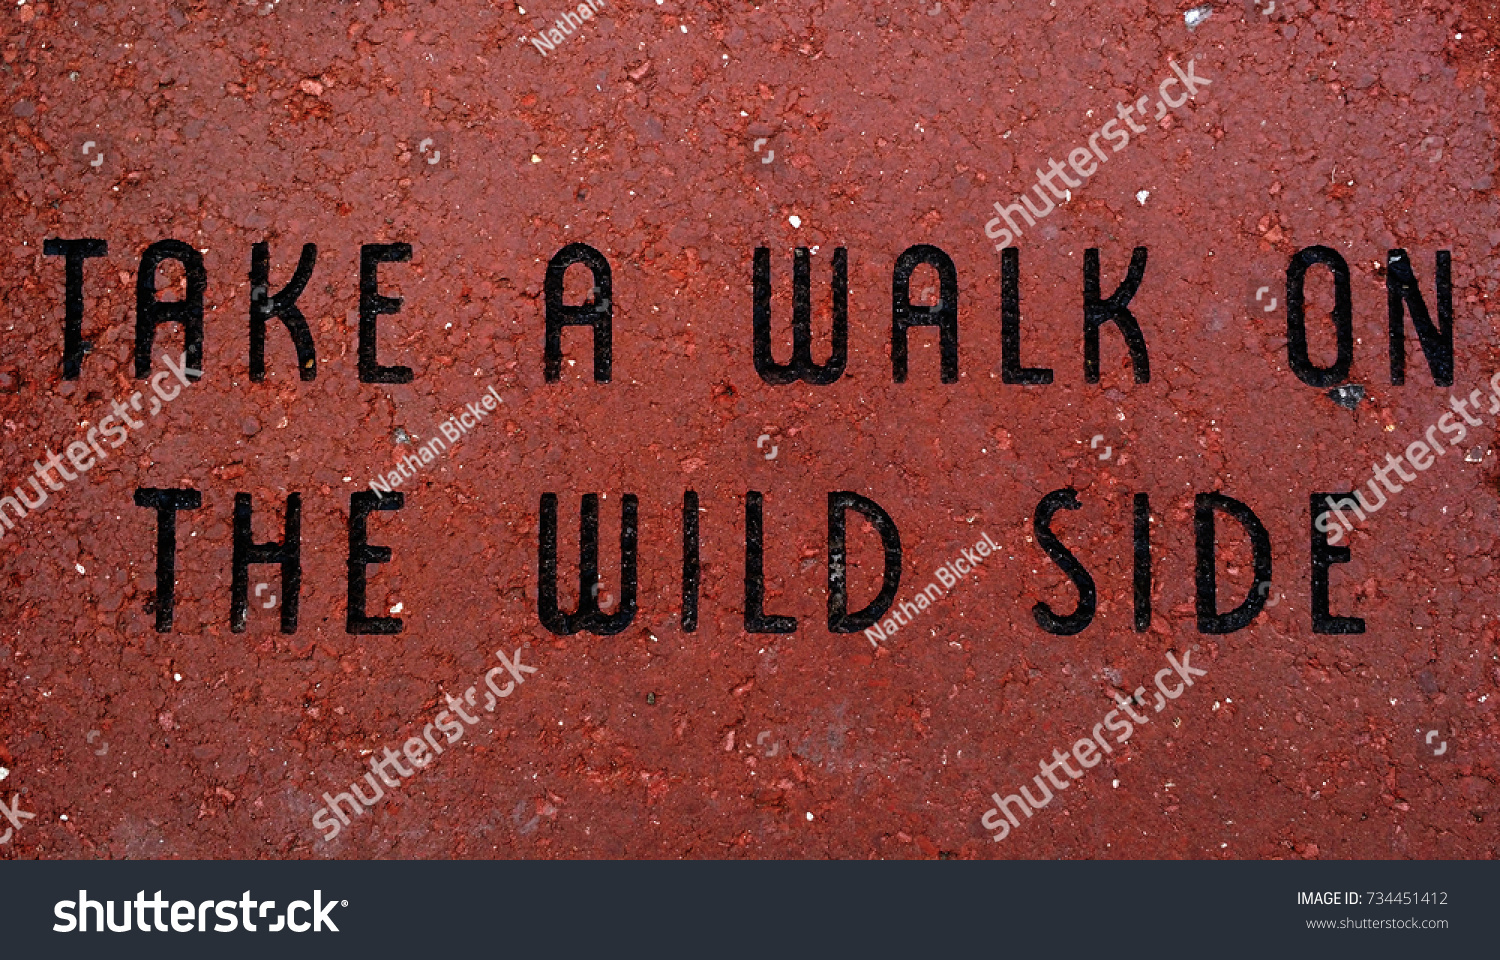 New Experiences Wallpaper. `Take A Walk On The Wild Side` Wallpaper and Background, with statement etched into red brick.  #734451412